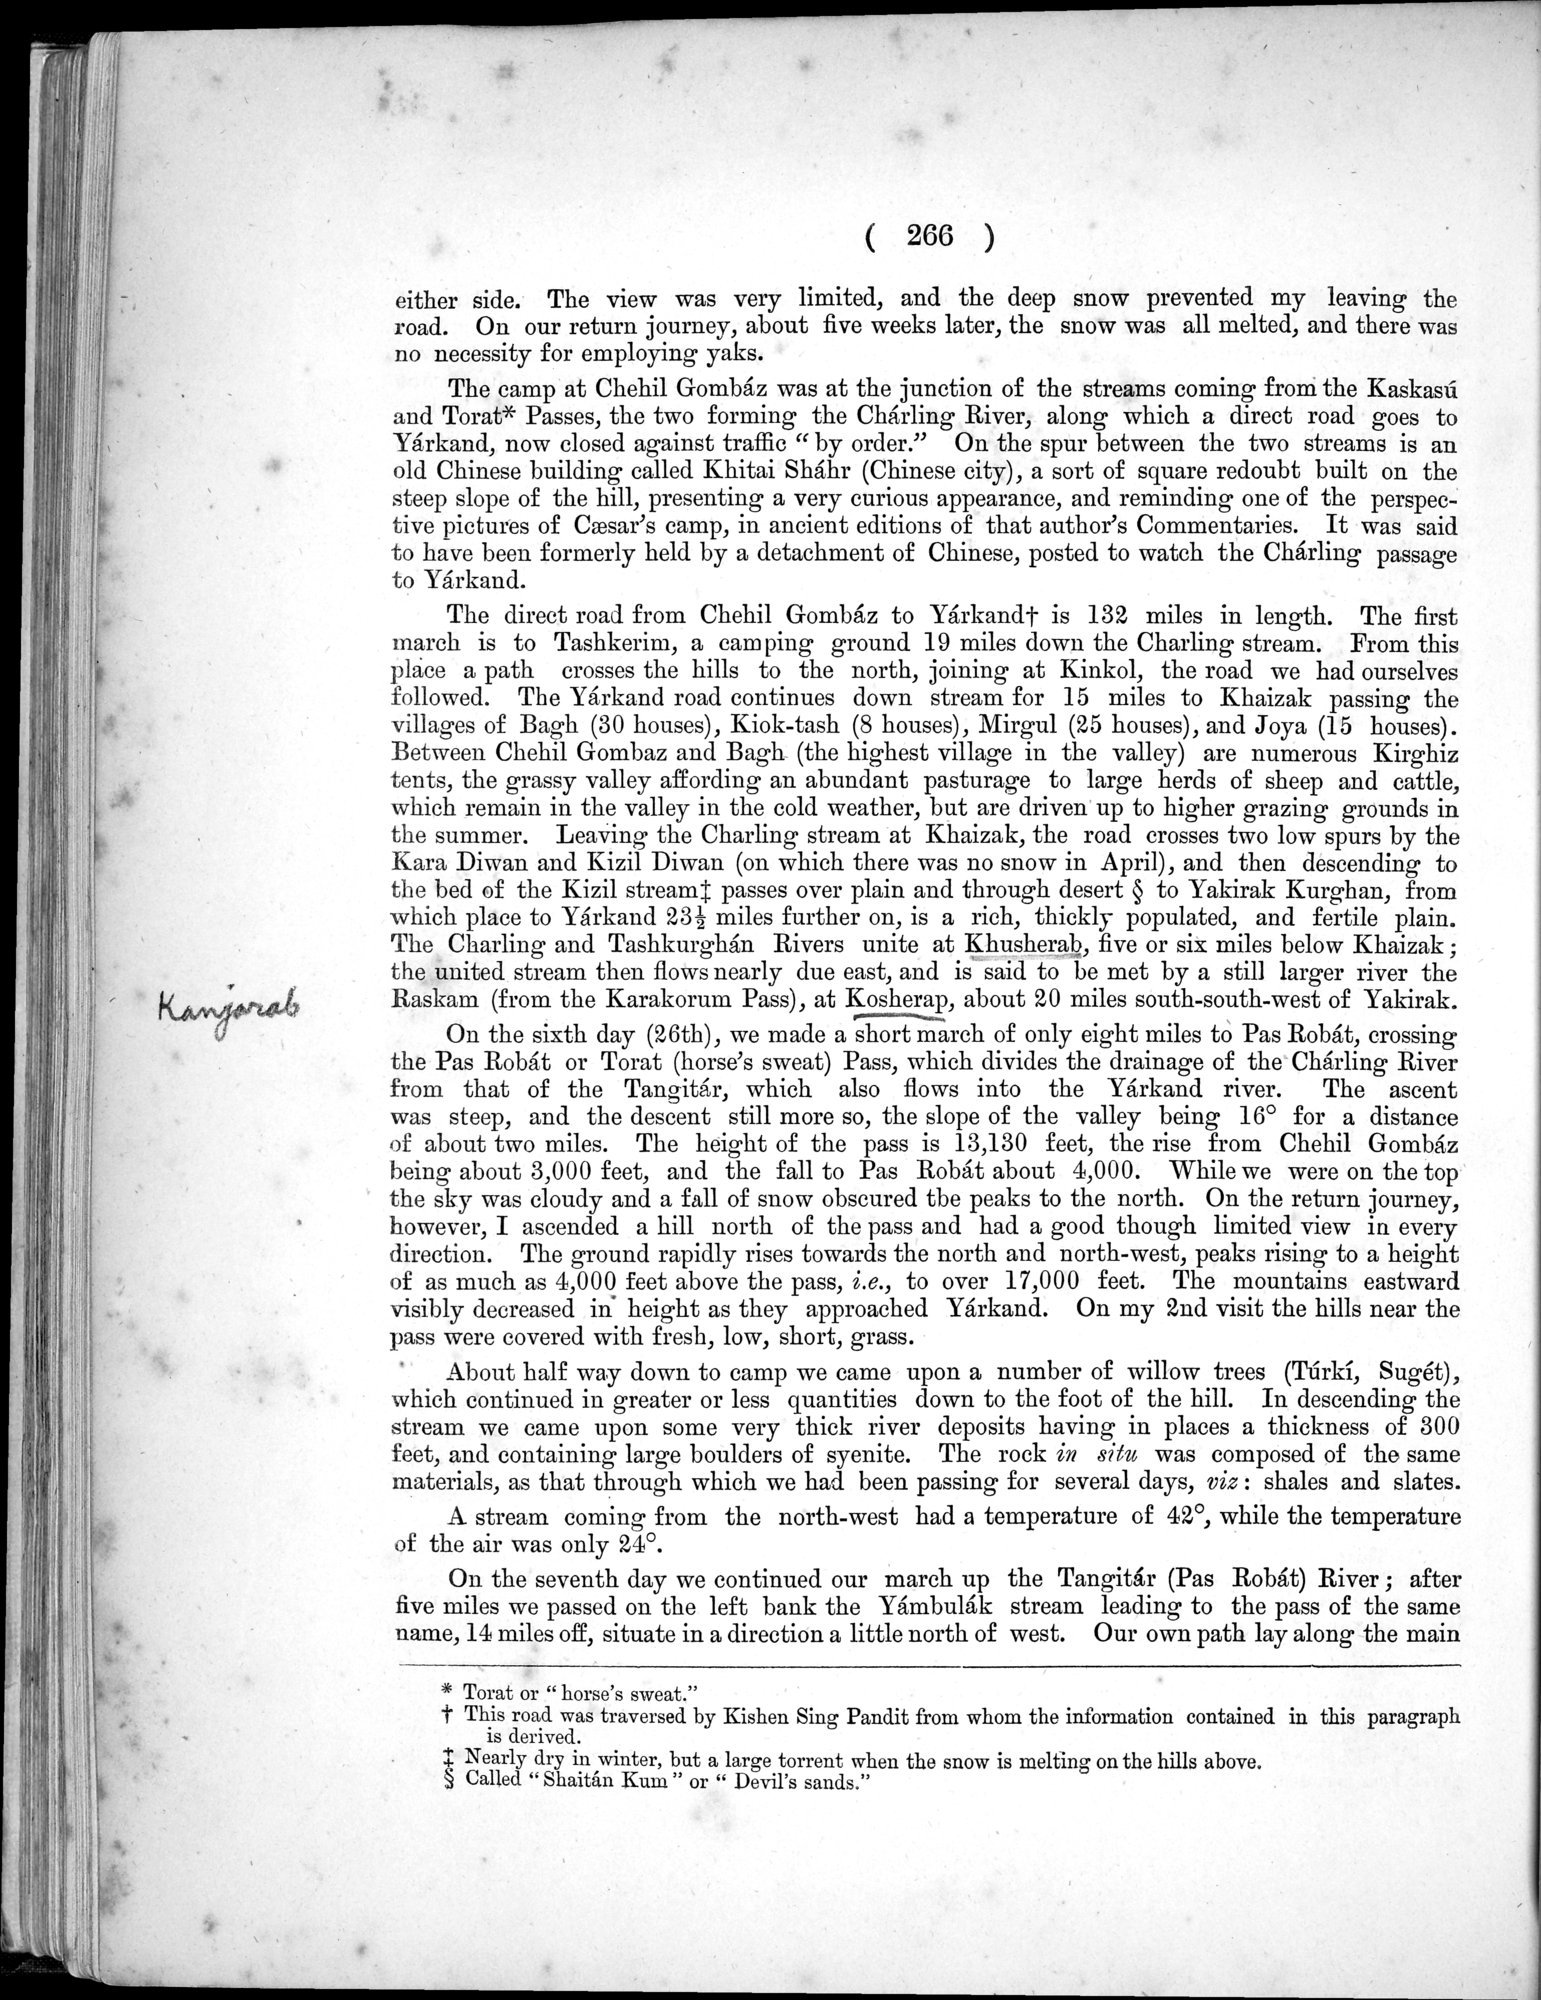 Report of a Mission to Yarkund in 1873 : vol.1 / Page 384 (Grayscale High Resolution Image)